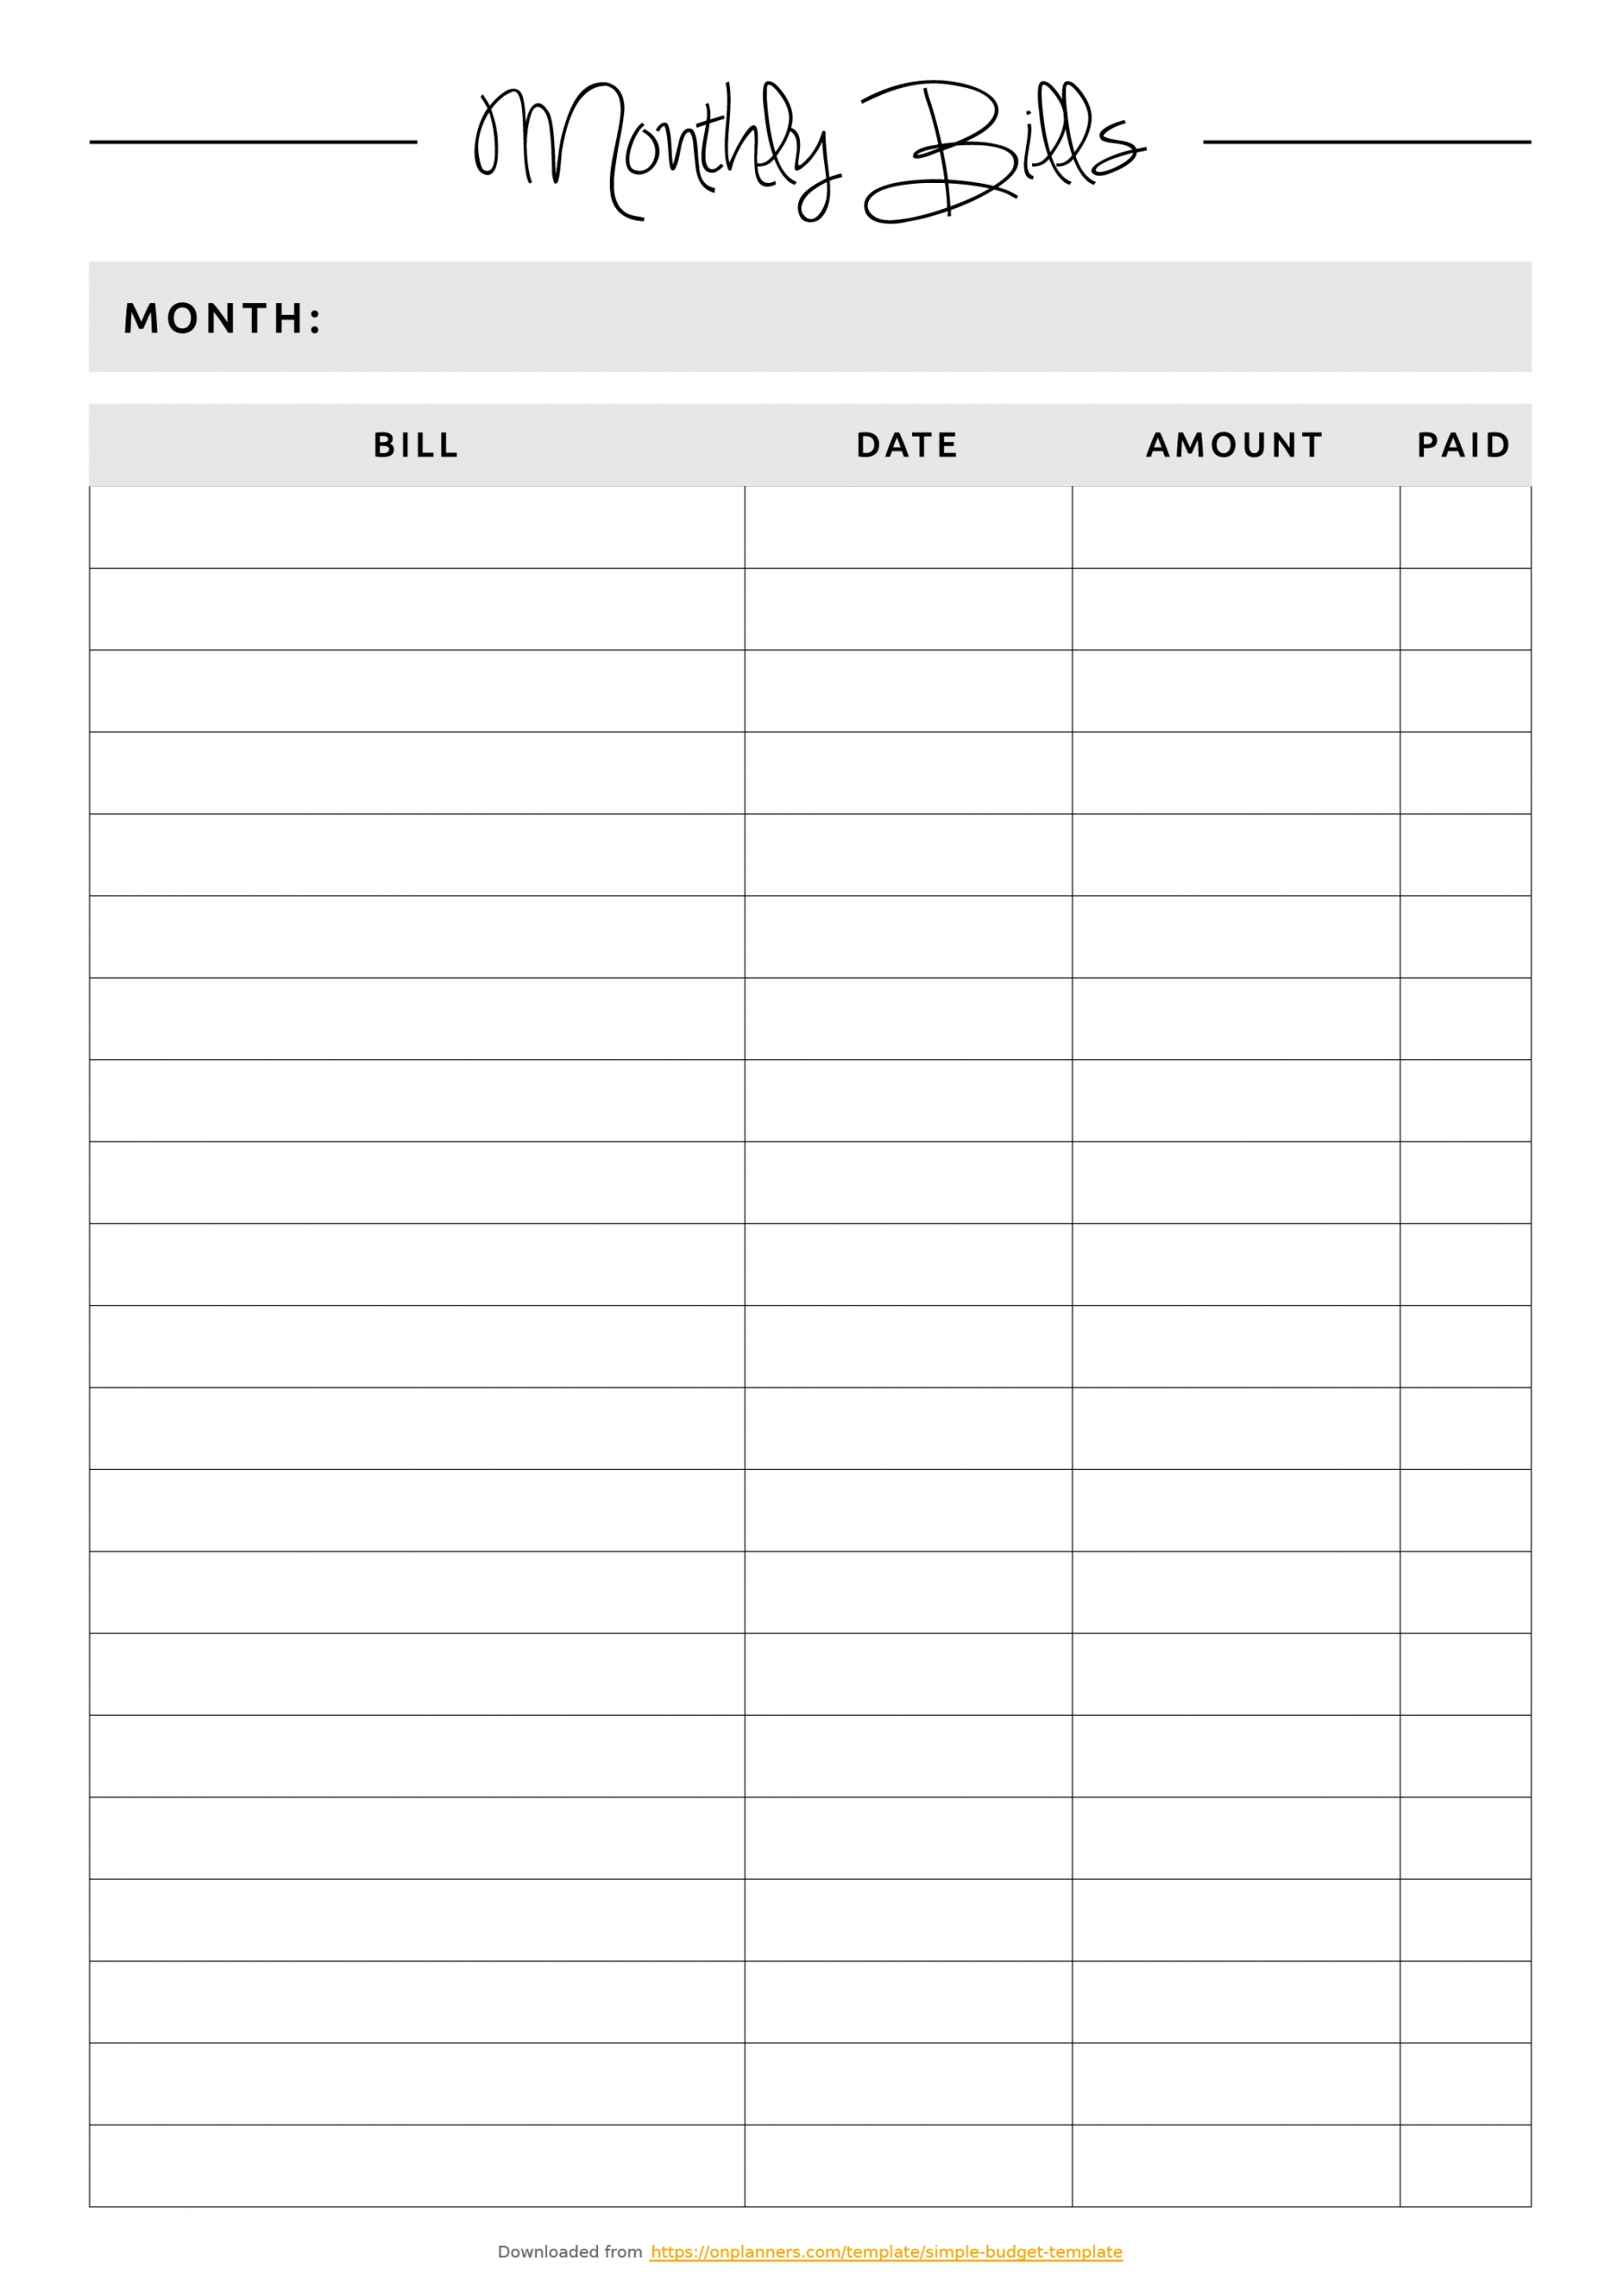 Pin On Budget Planners  Monthly Bill Worksheet Pdf